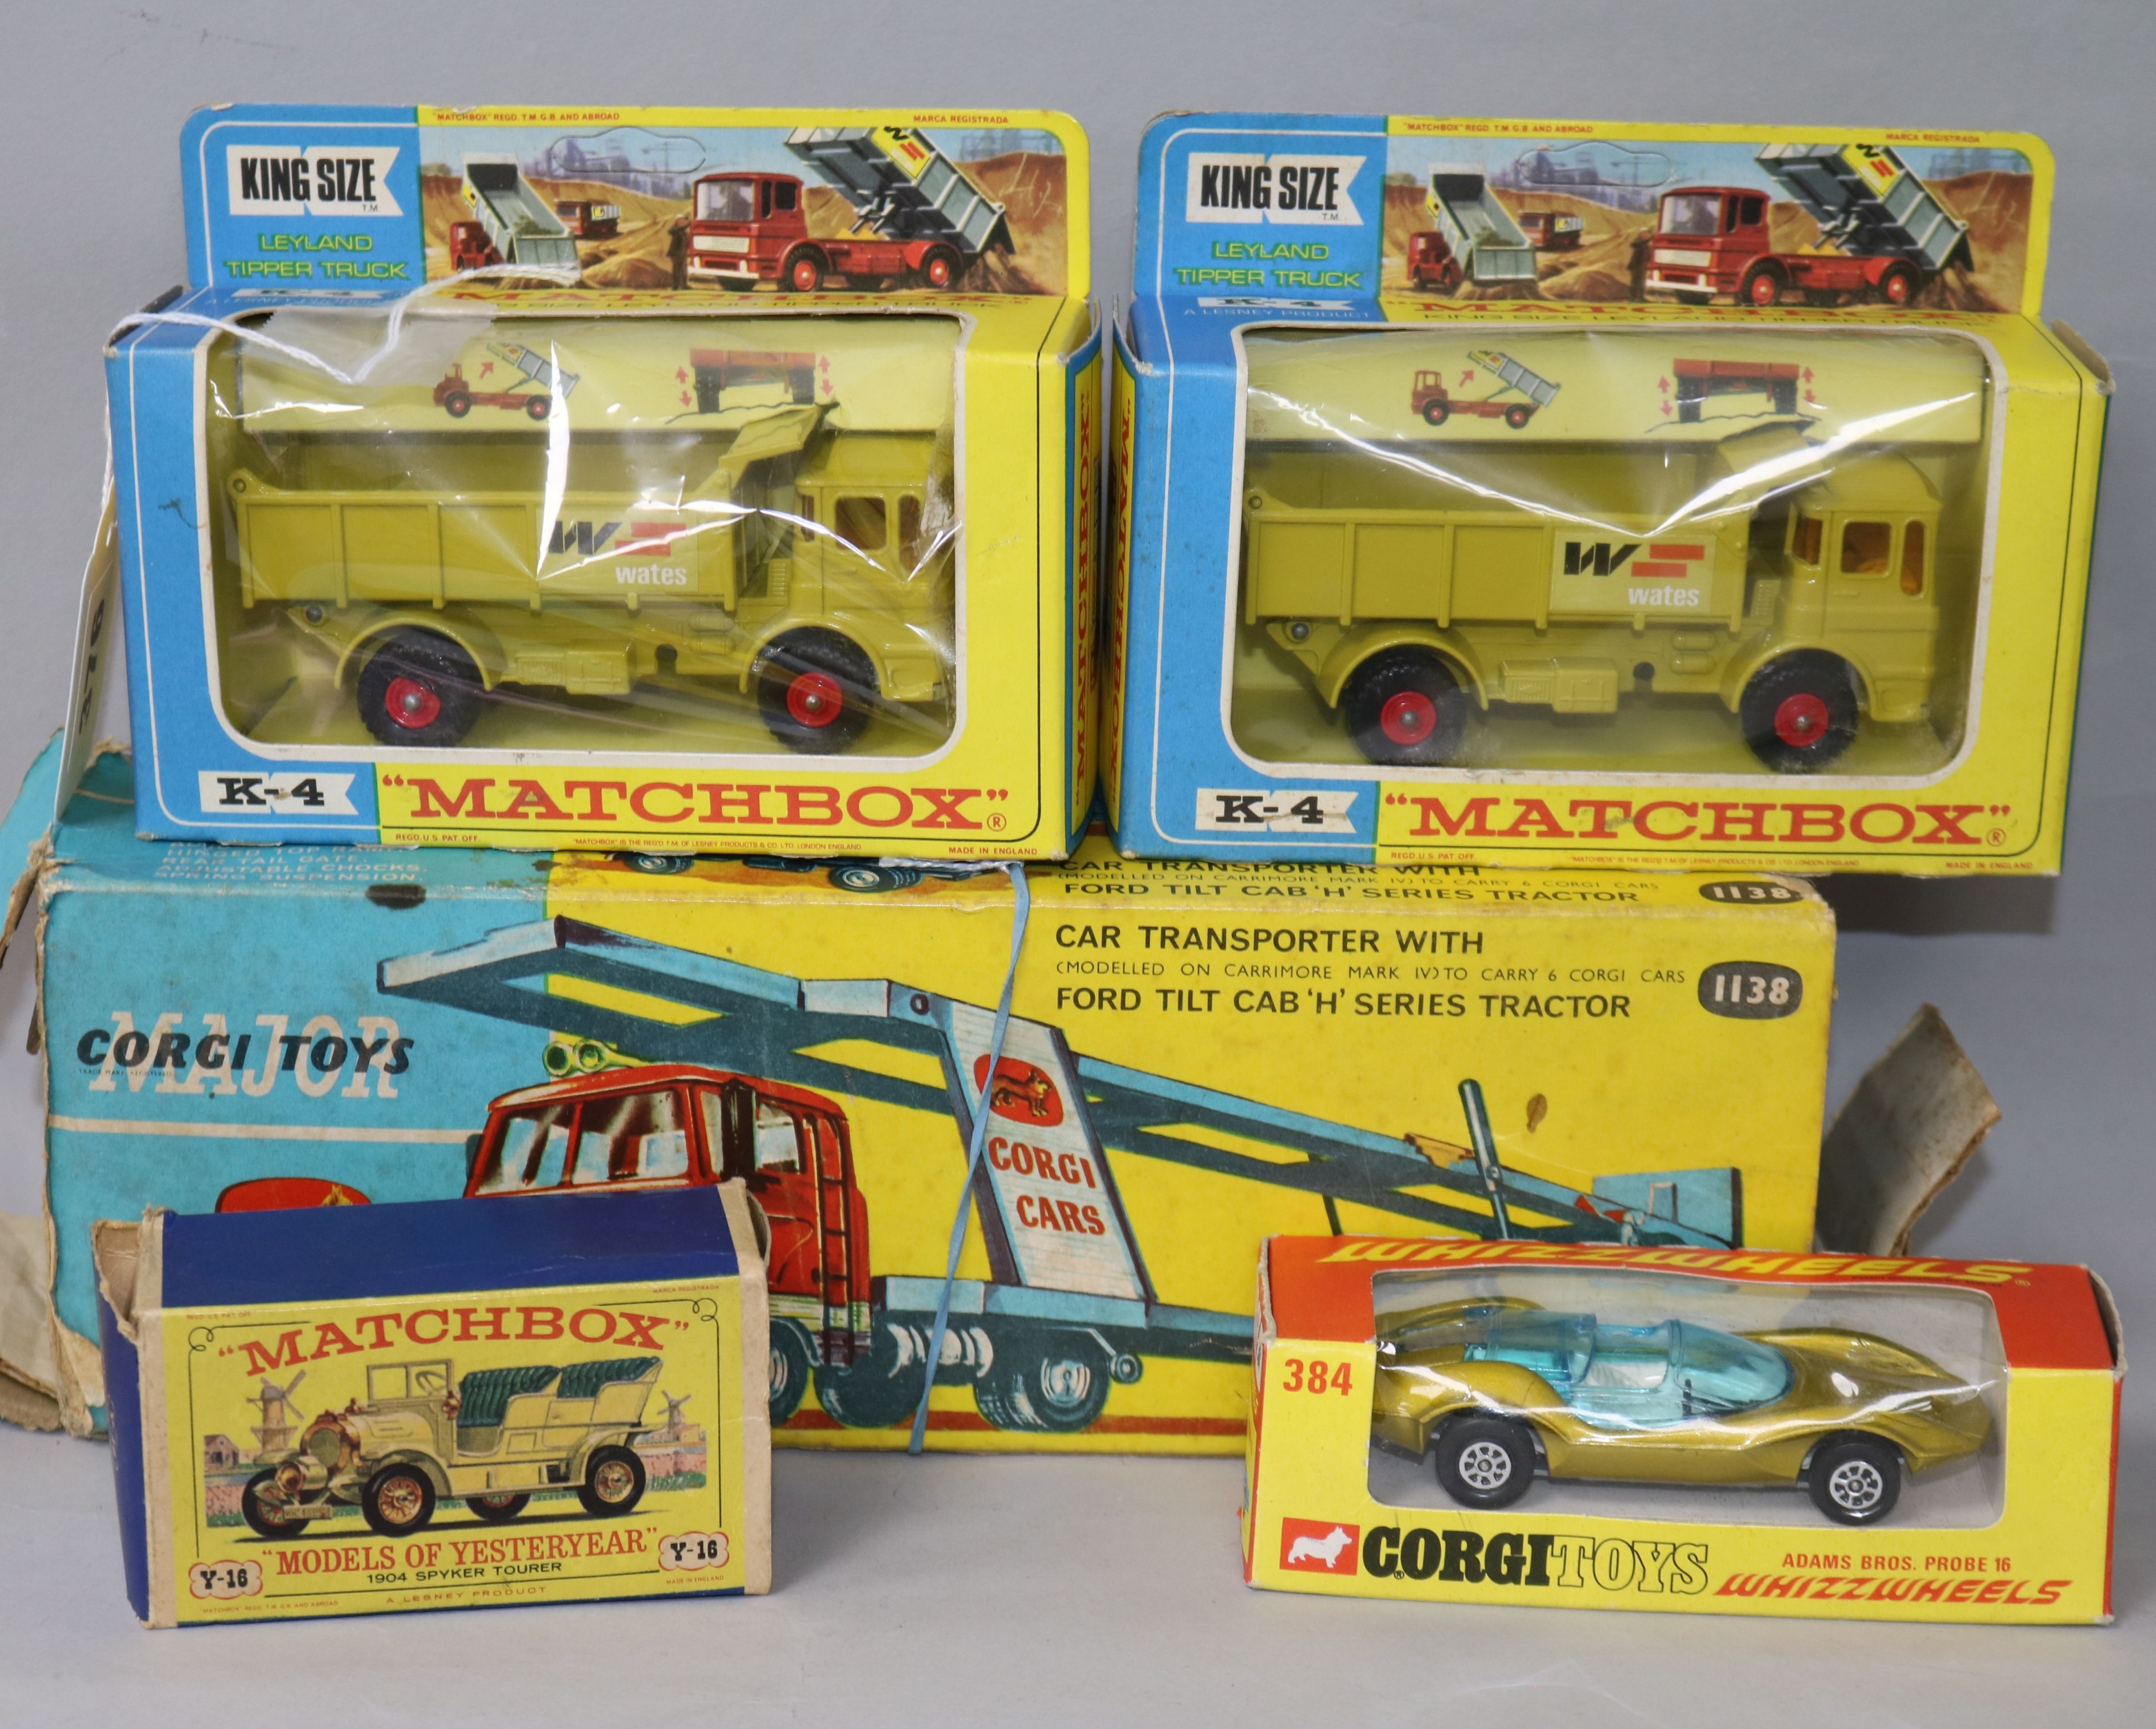 A Corgi Car Transporter No. 1138, boxed with diorama and four other boxed vehicles, including two